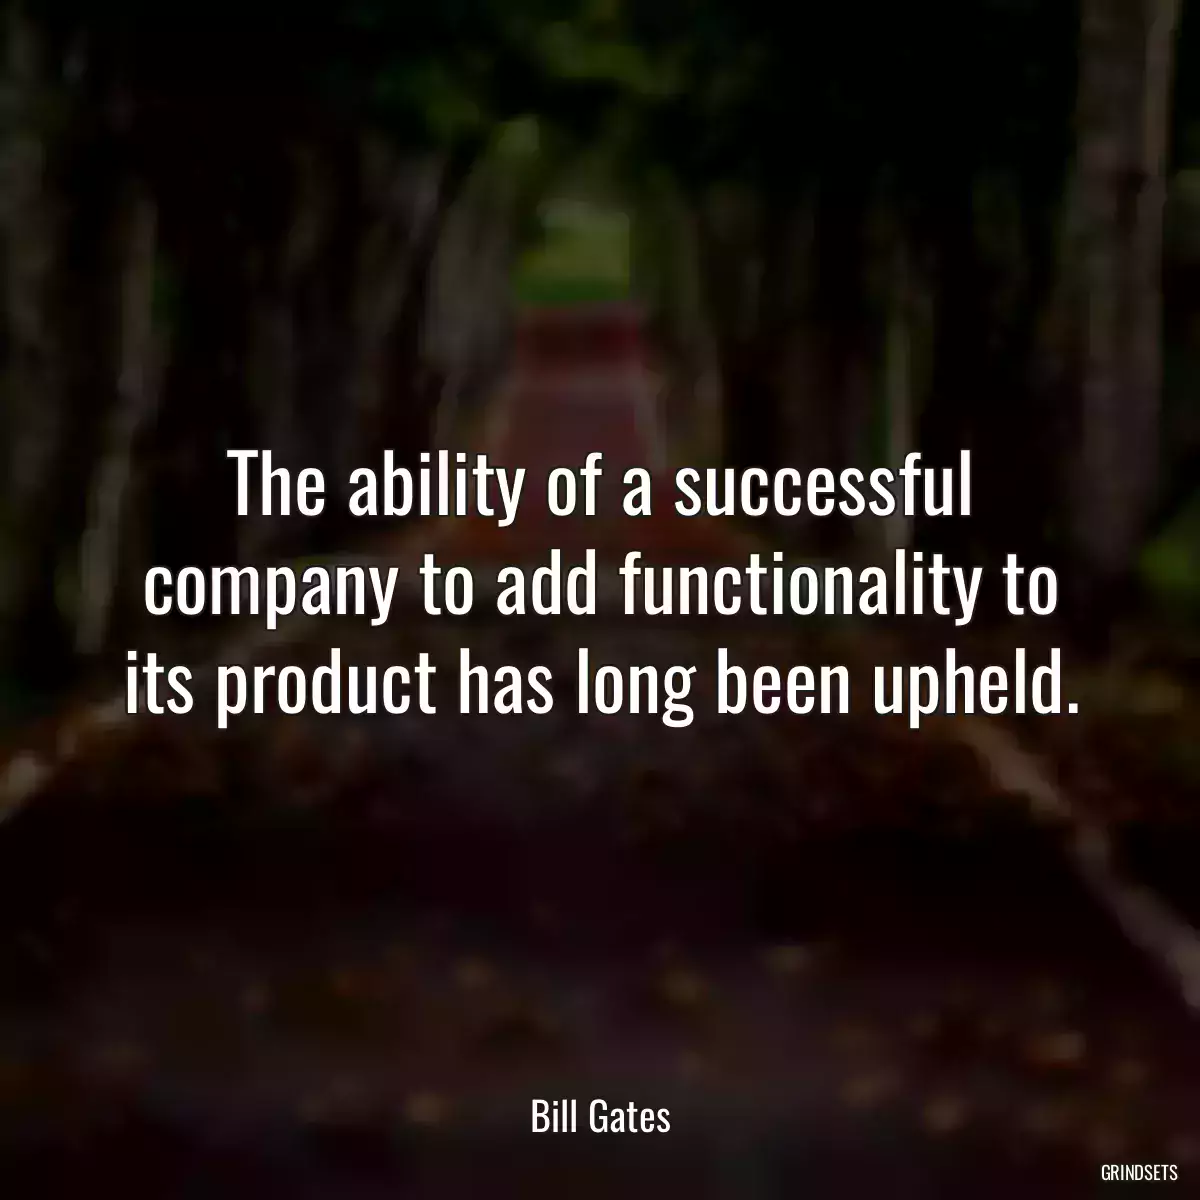 The ability of a successful company to add functionality to its product has long been upheld.